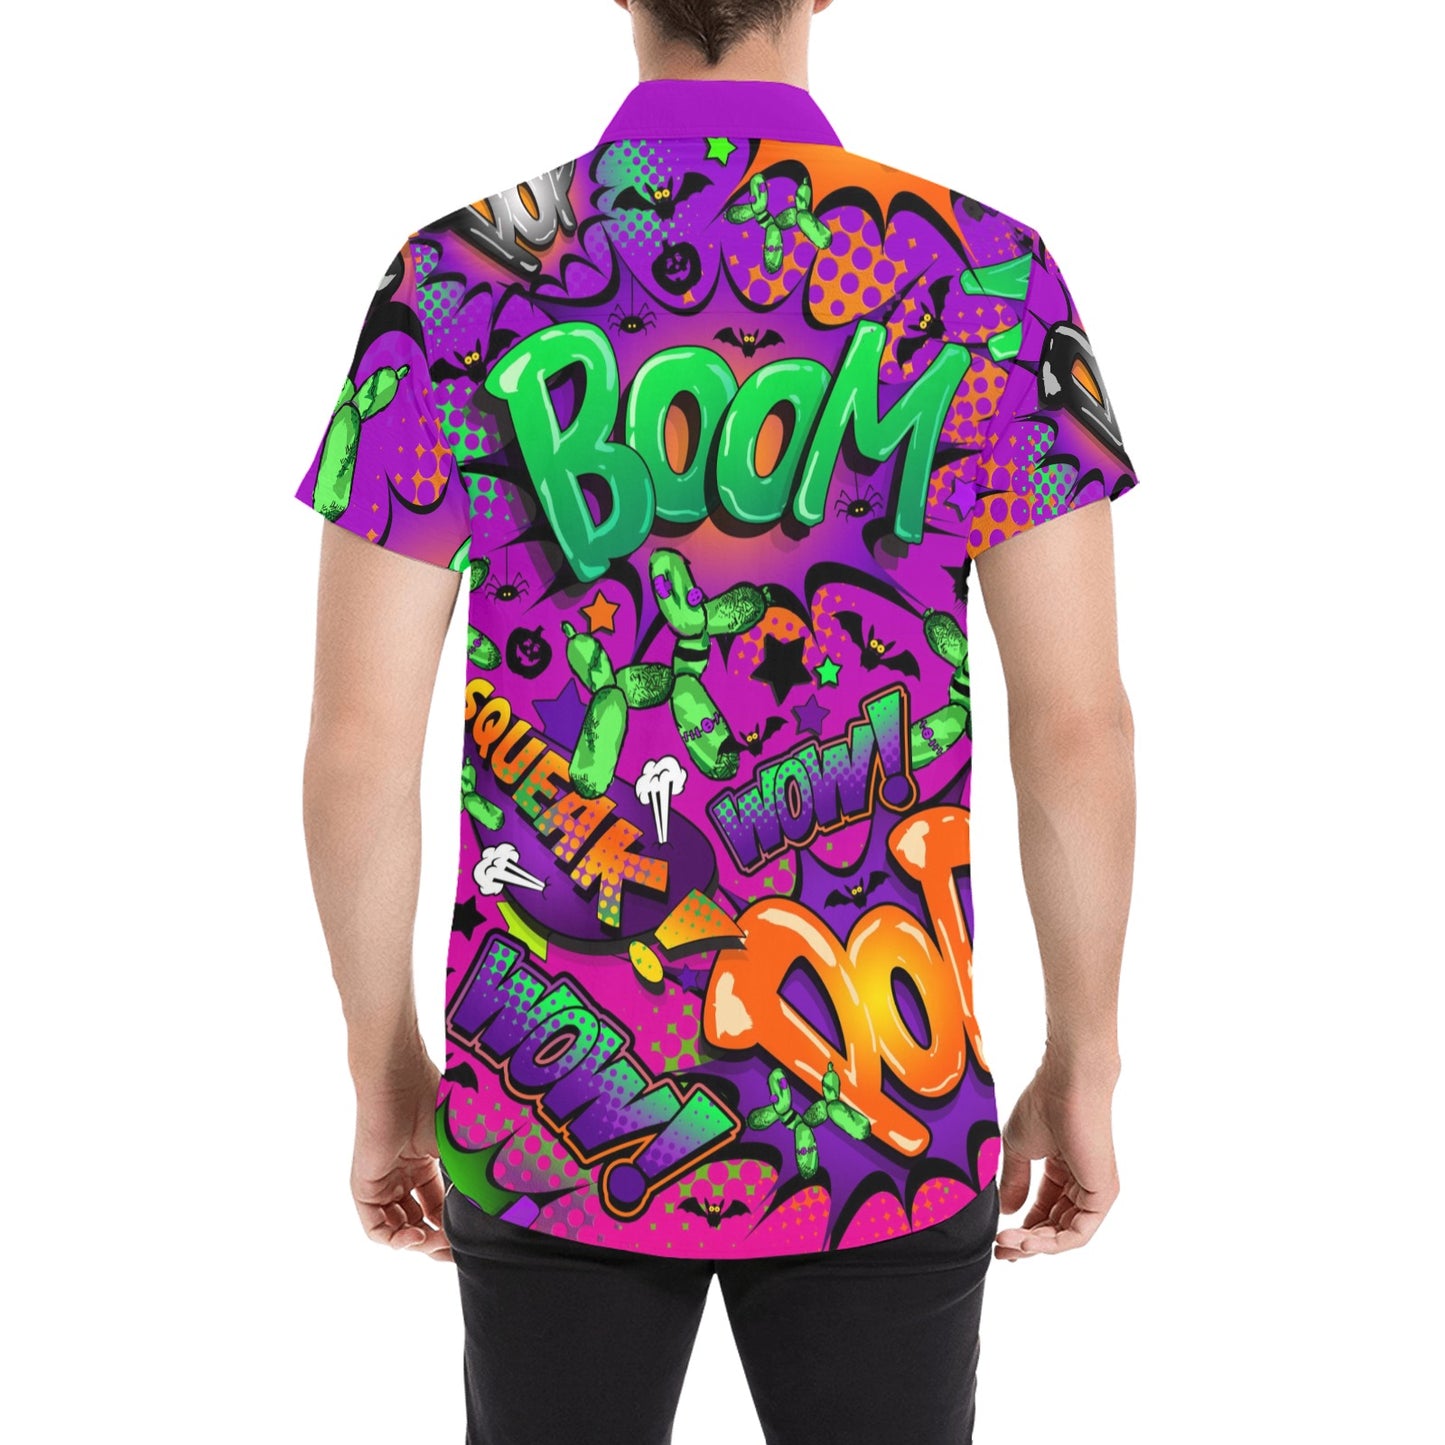 Purple Halloween Shirt for Entertainers and balloon dog lovers